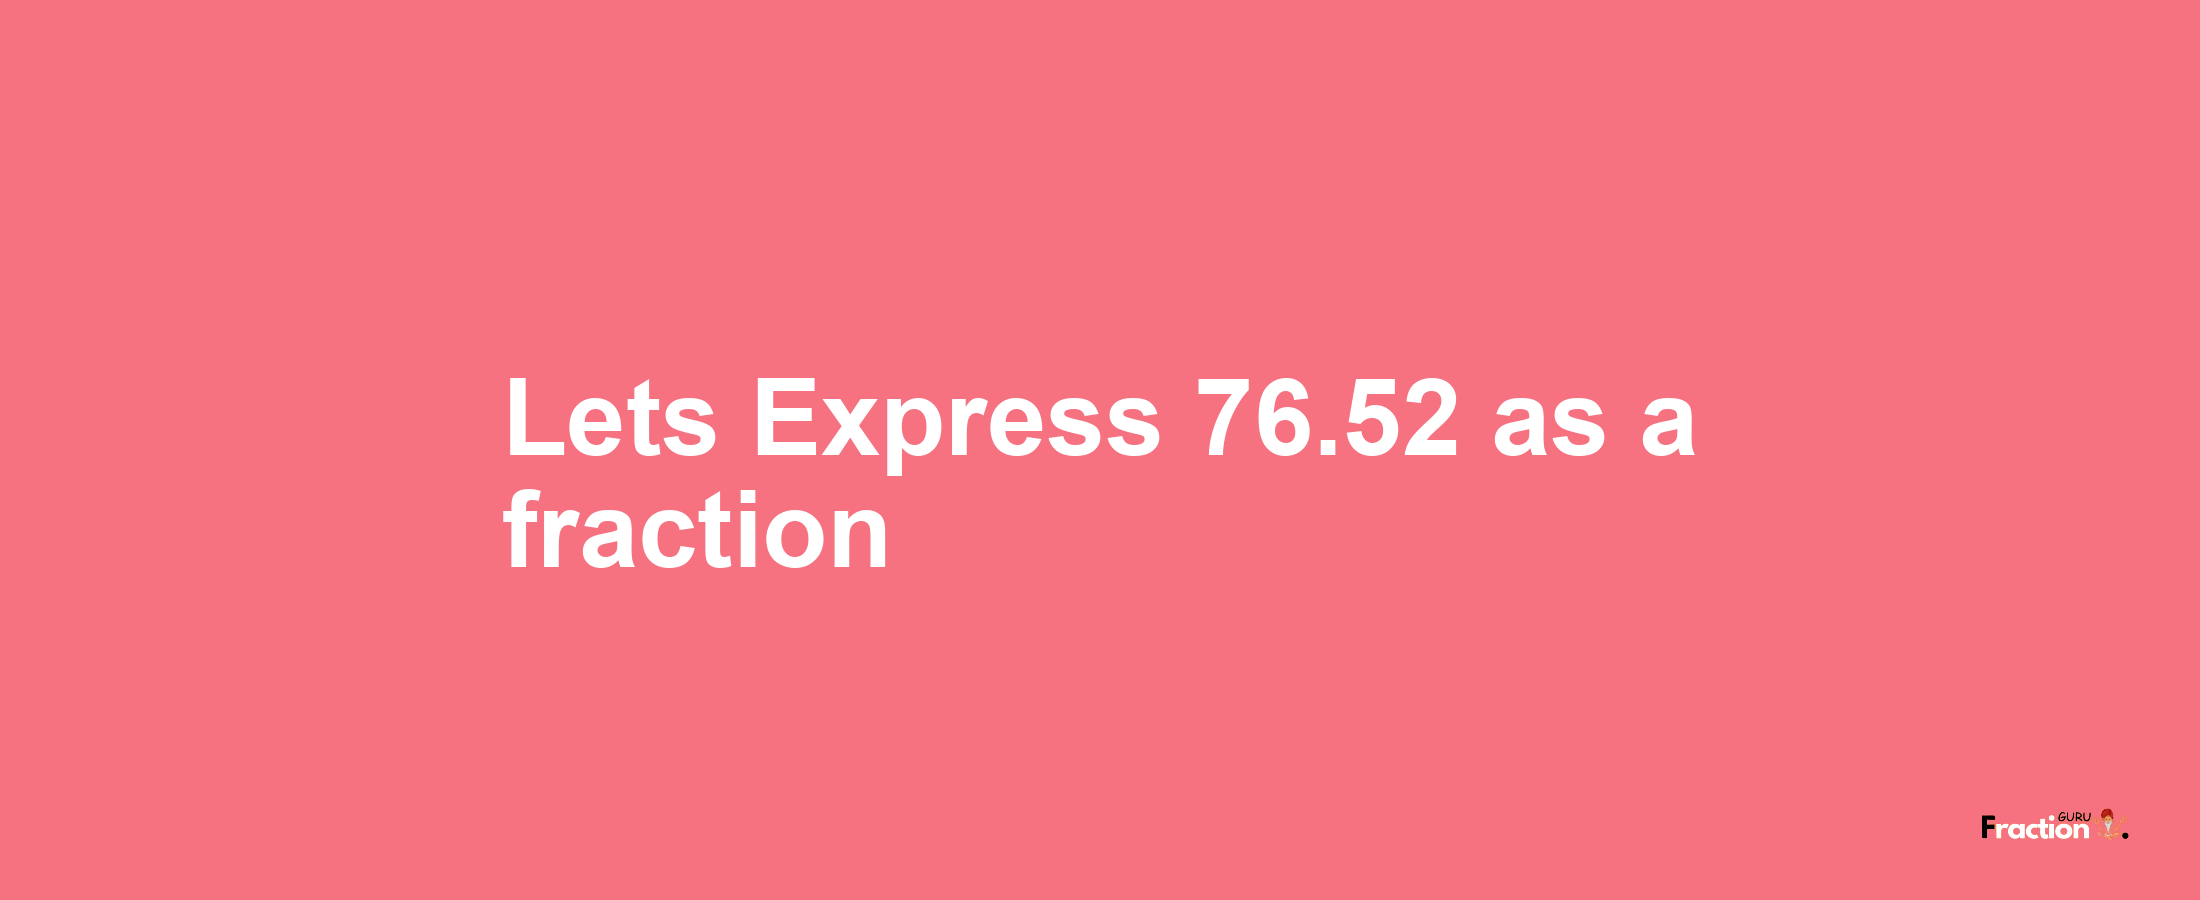 Lets Express 76.52 as afraction